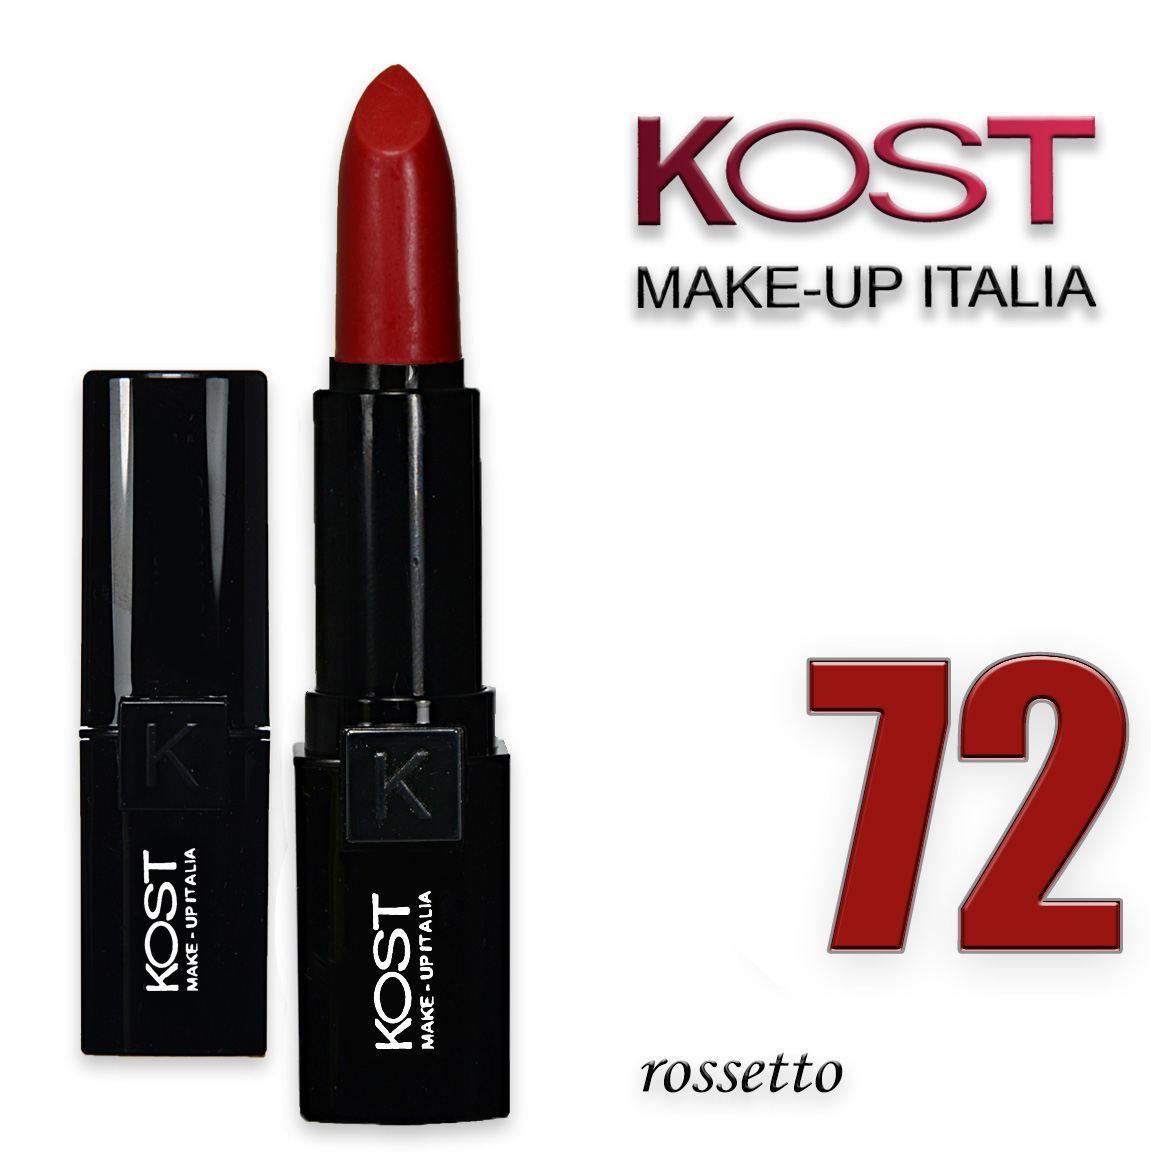 Rossetto kost 72